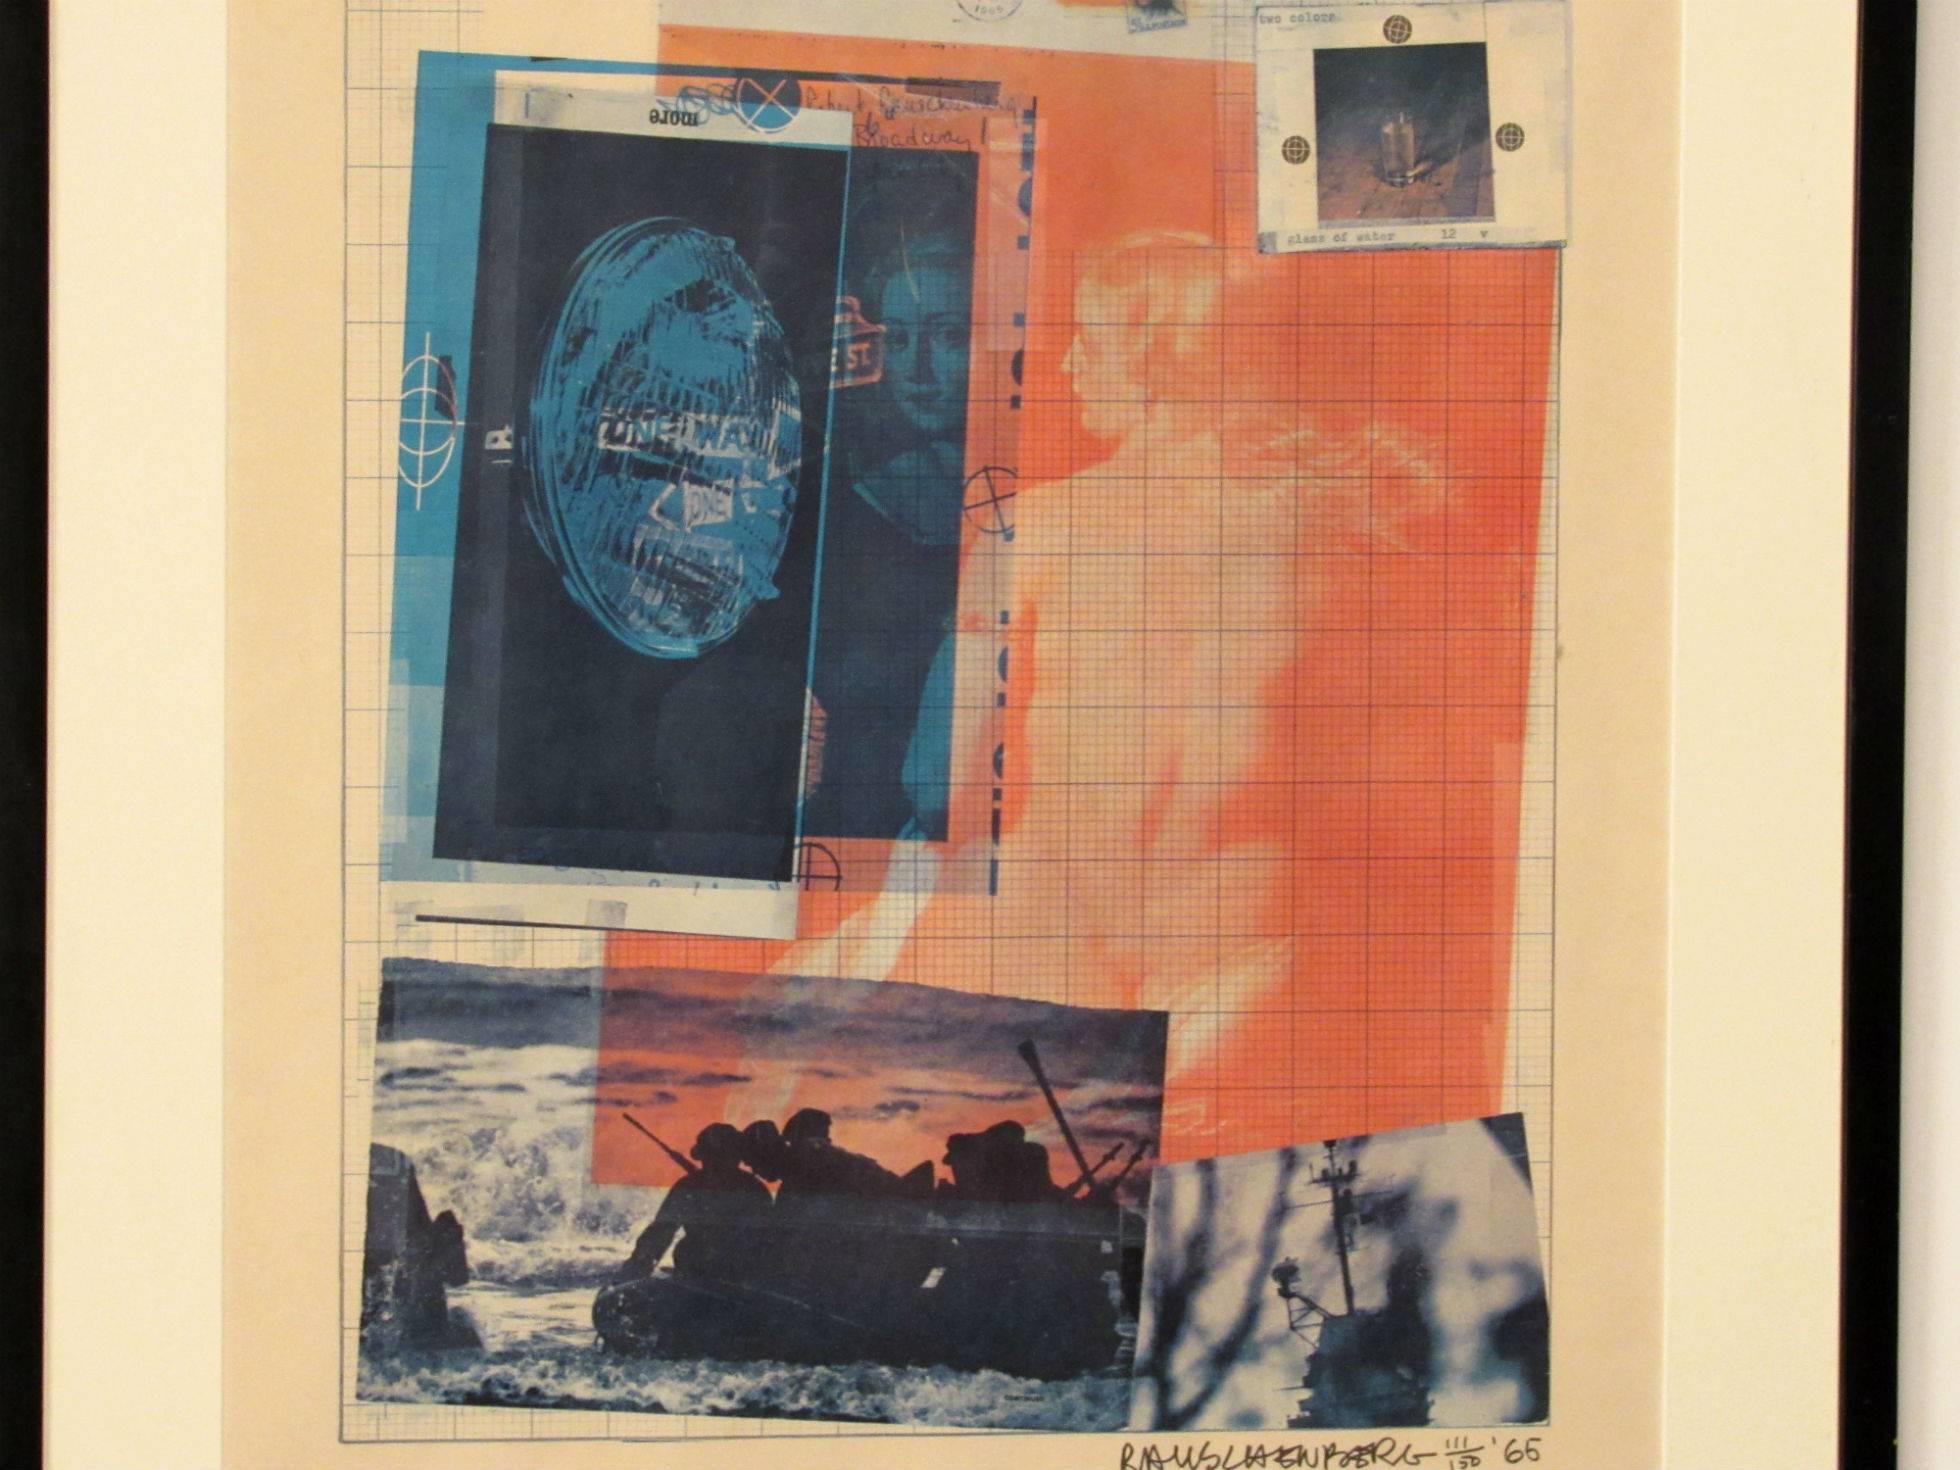 Robert Rauschenberg, Paris Review, 1965

Lithograph 
Measures: 20.1 x 16.1 in. (51.05 x 40.89 cm.) 
Signed; numbered and dated in marker in the lower right corner.

Printed 1965
111 of 150.
      